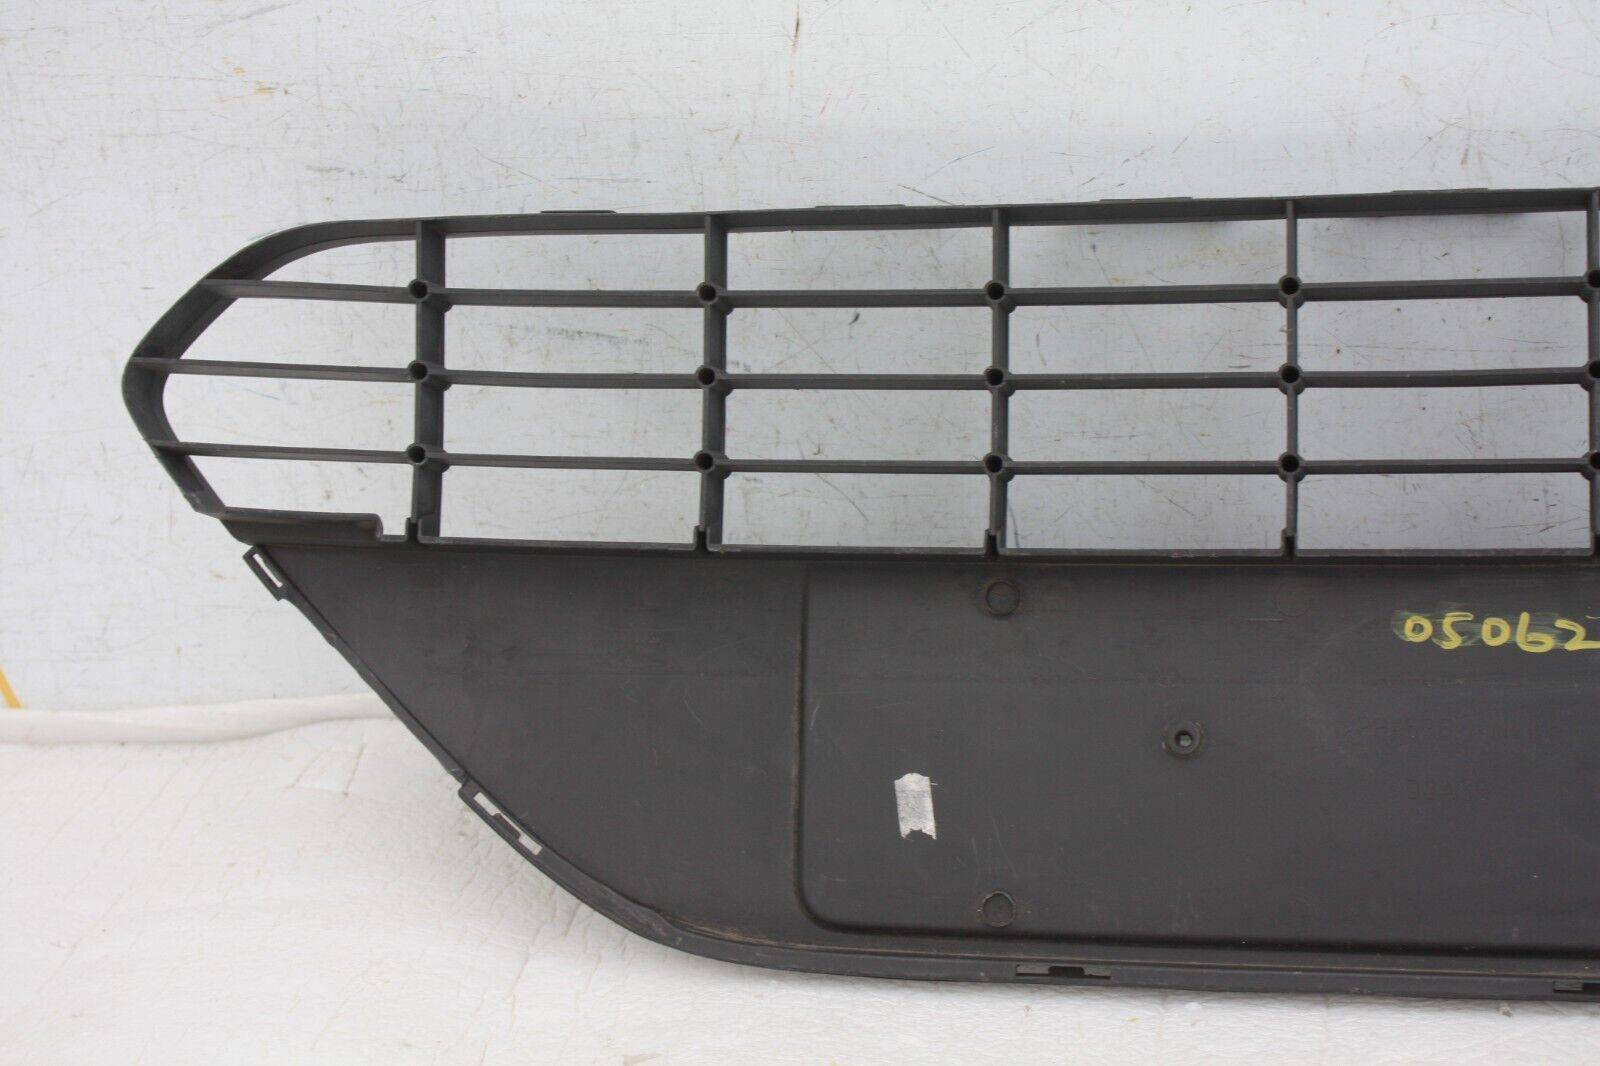 Ford-Focus-Front-Bumper-Grill-2008-TO-2011-8M51-17B968-BE-Genuine-DAMAGED-176410989719-12